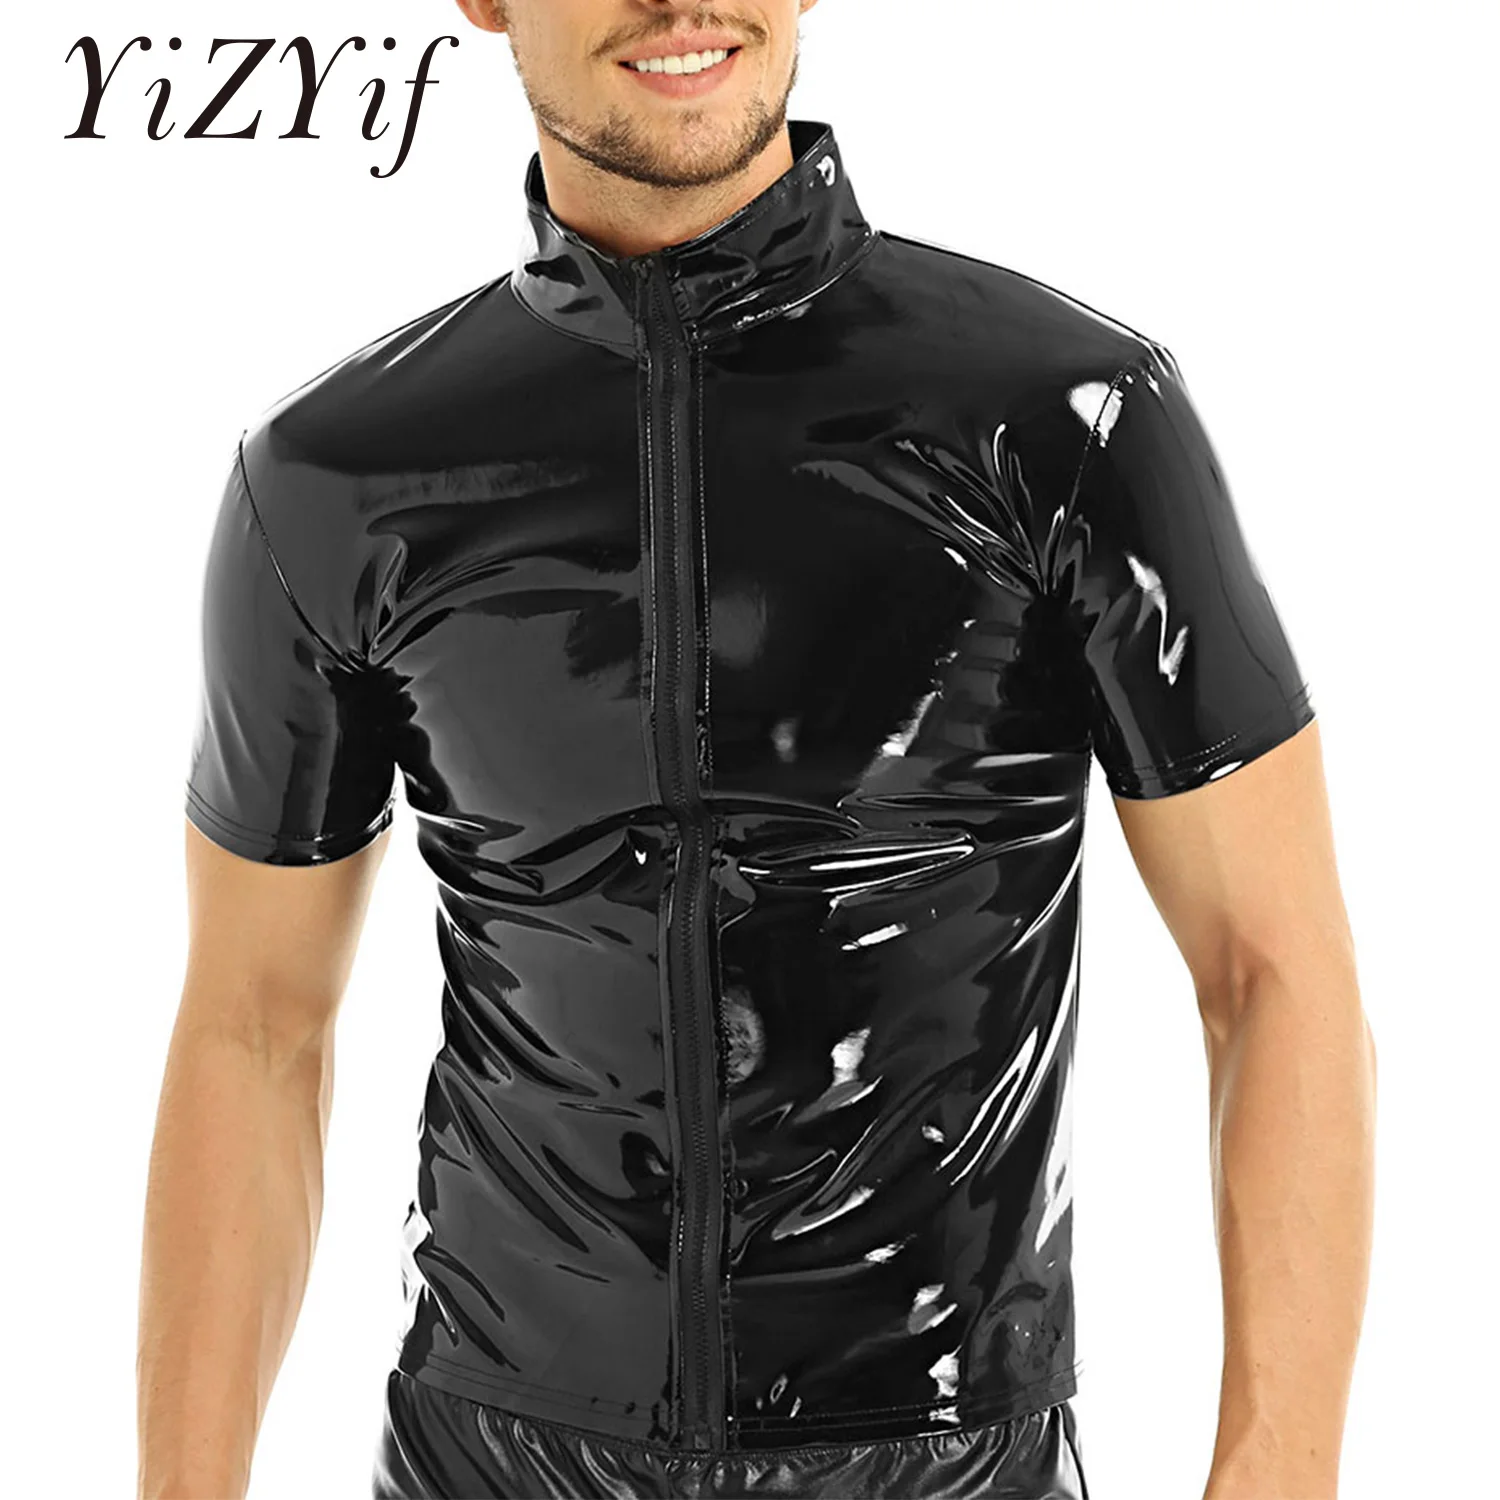 YiZYiF Black Shiny T Shirt Unisex Metallic Hipster PVC Leather Tshirt Sexy Stand Collar Short Sleeves Front Zip Up T-shirt Tops